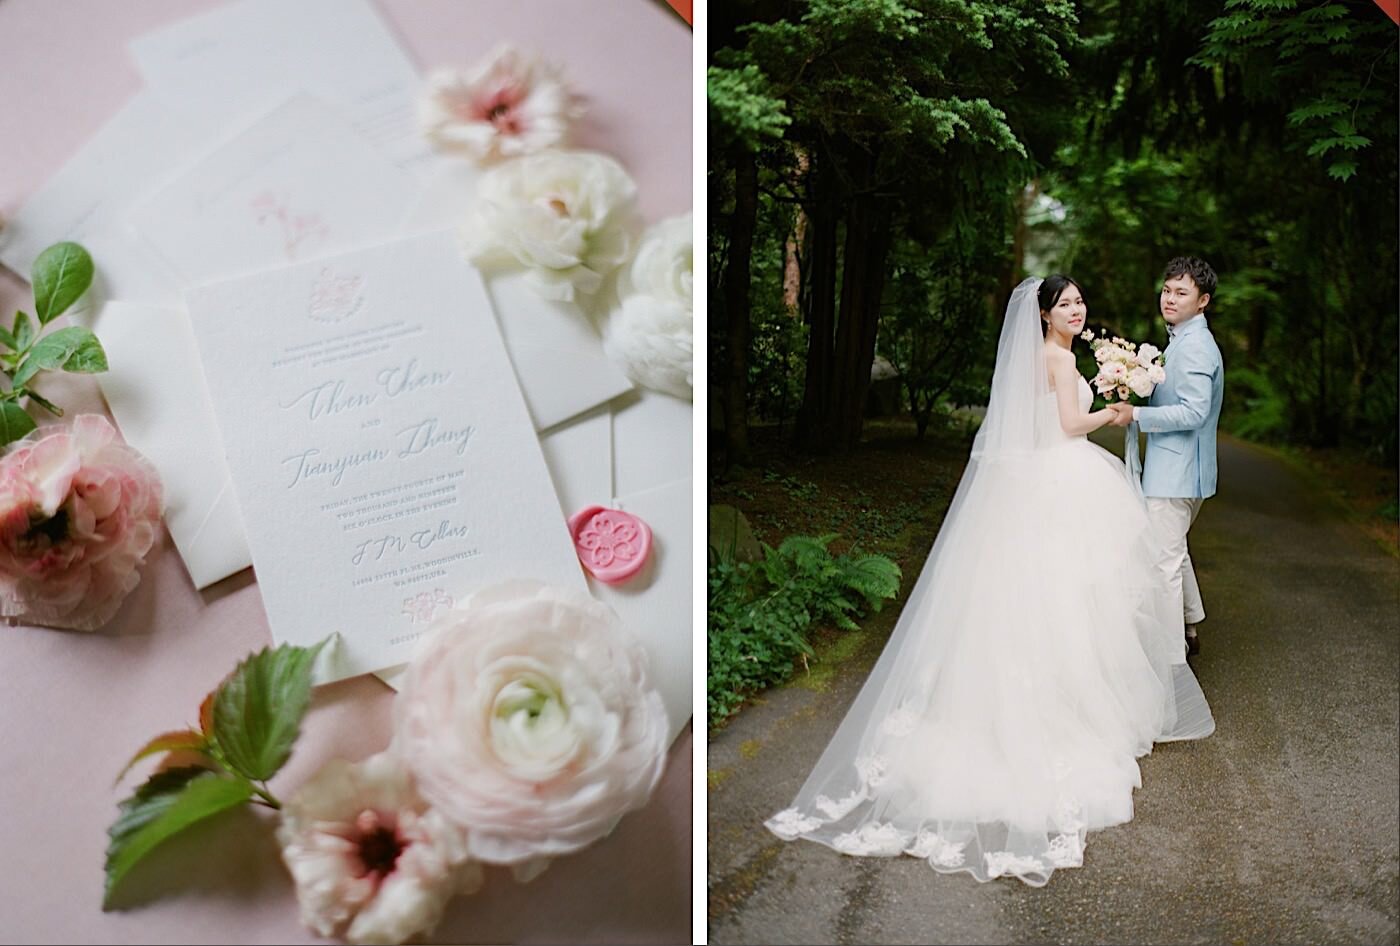 A chic, pastel wedding in Woodinville